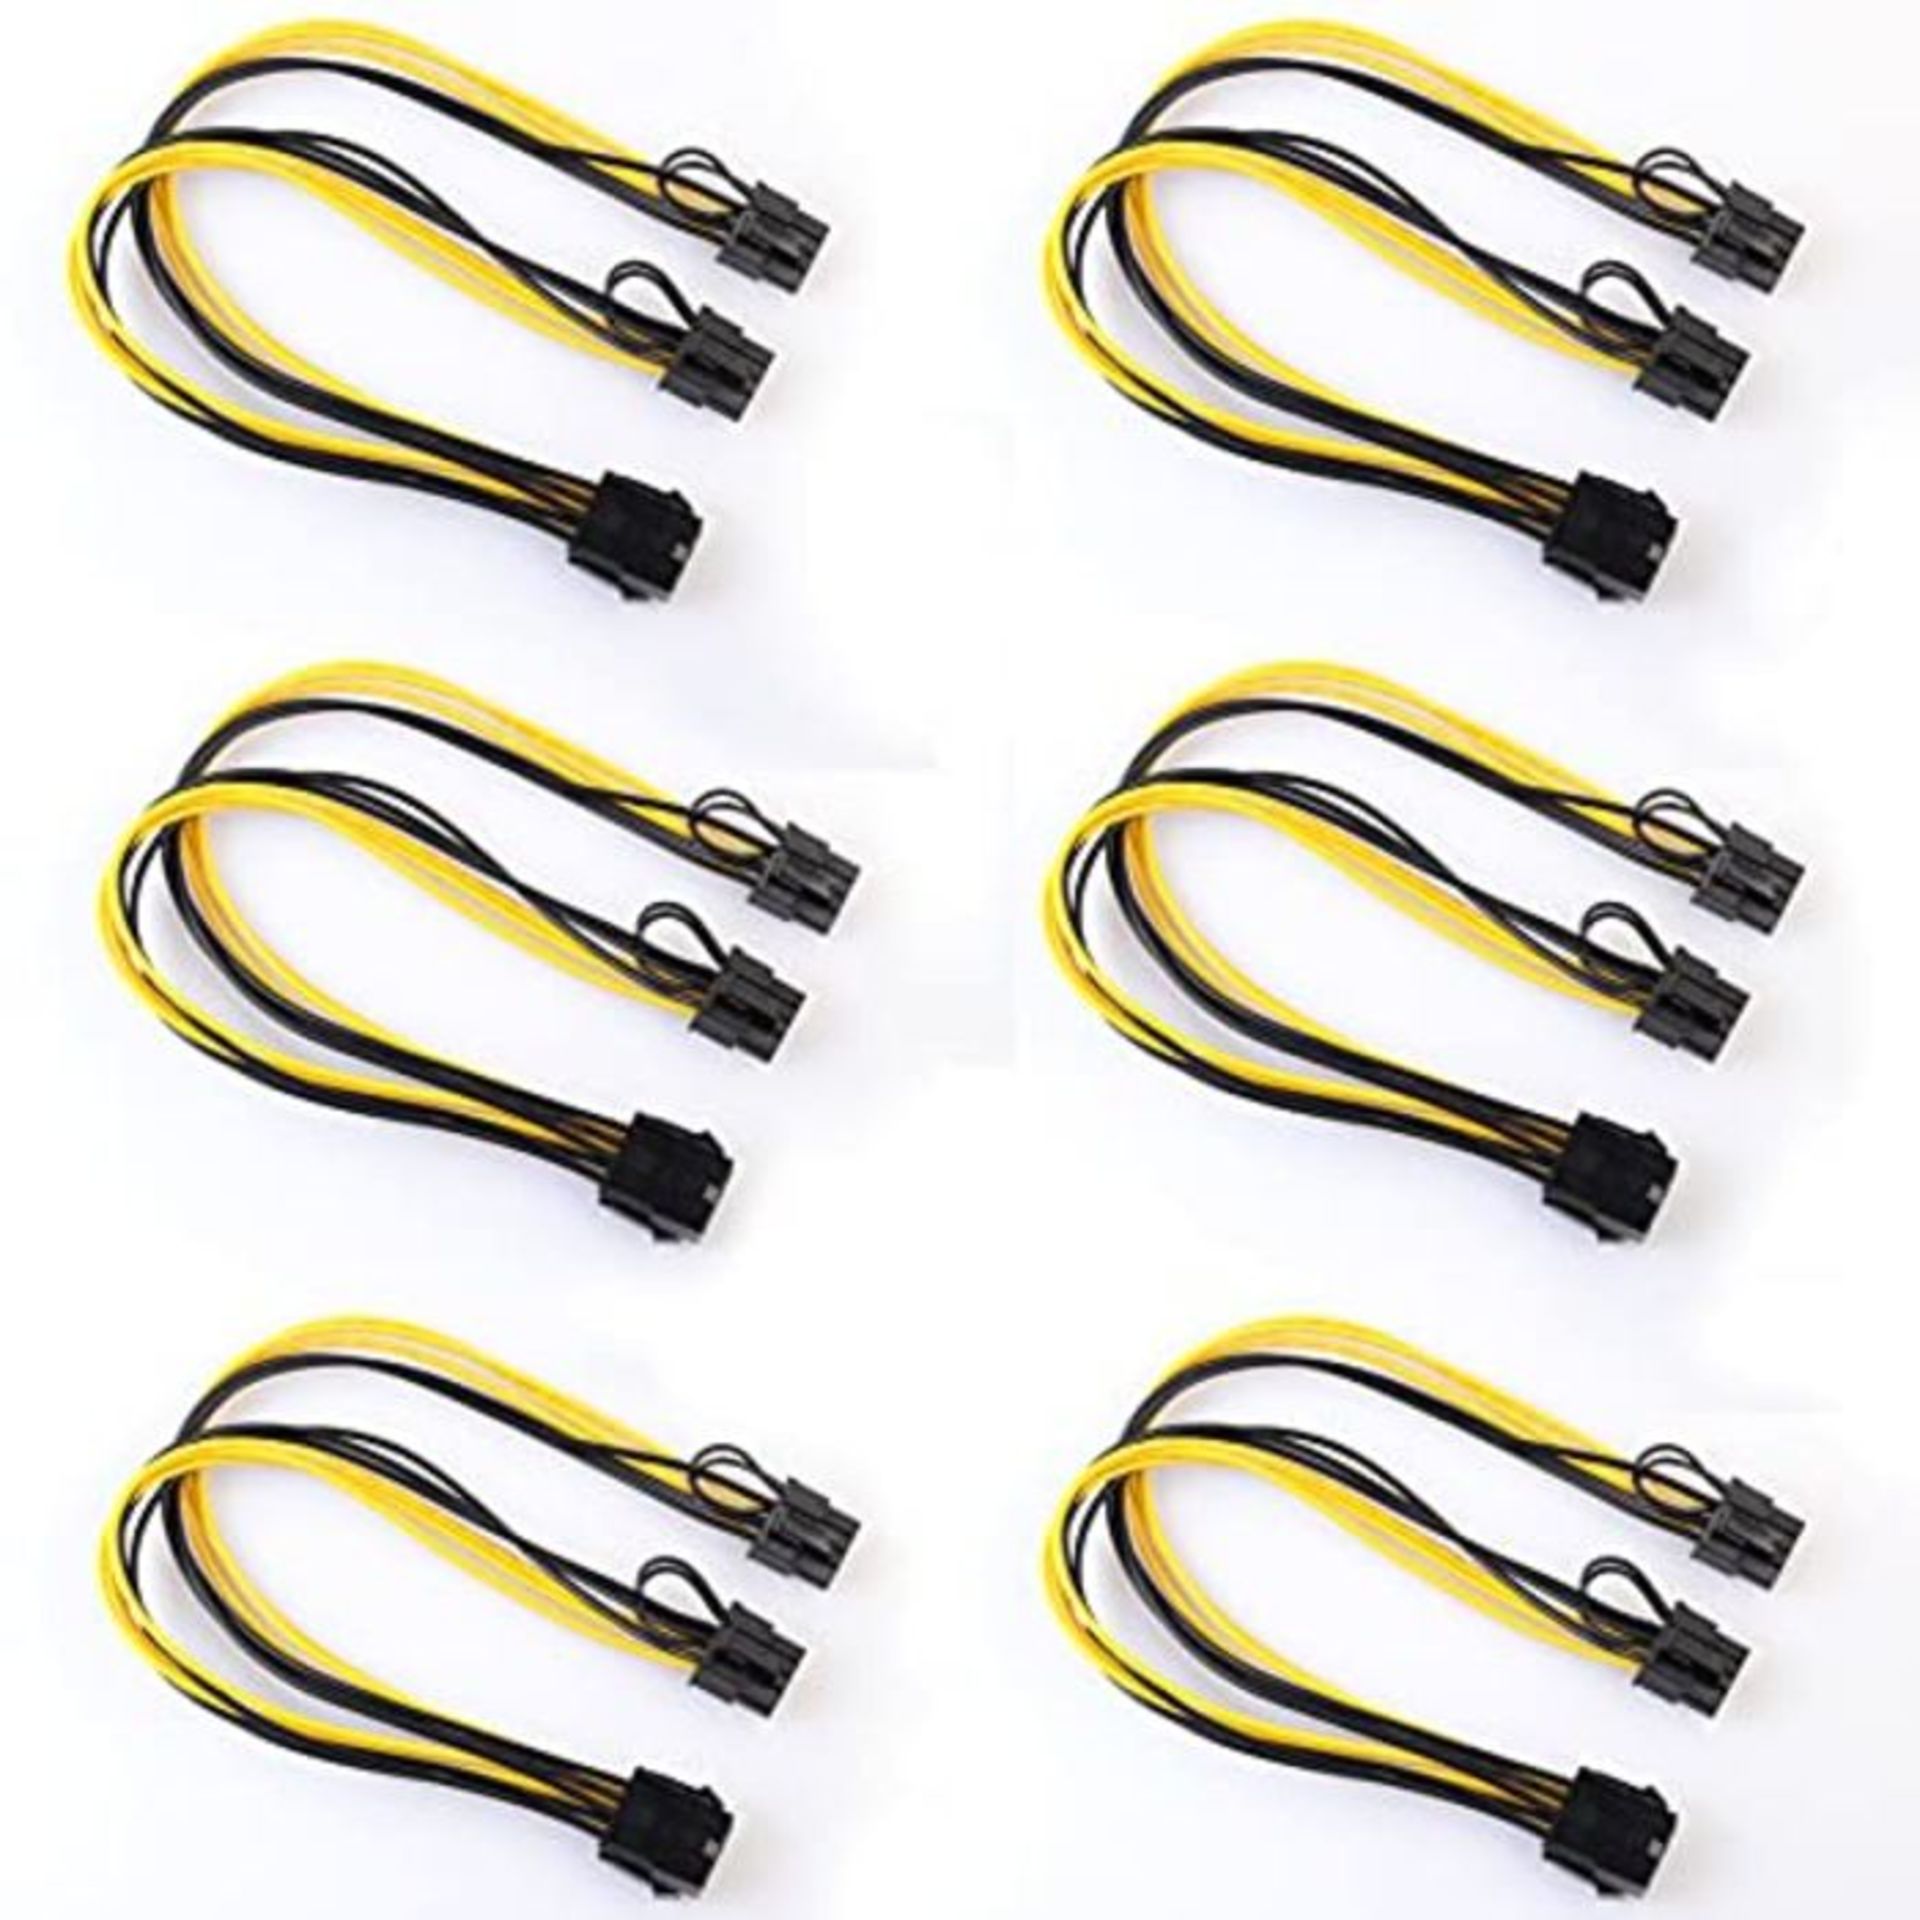 Ziyituod PCIe Splitter,12.5in/32cm 8pin vers Double PCIe 8pin (6 + 2) Carte Graphique